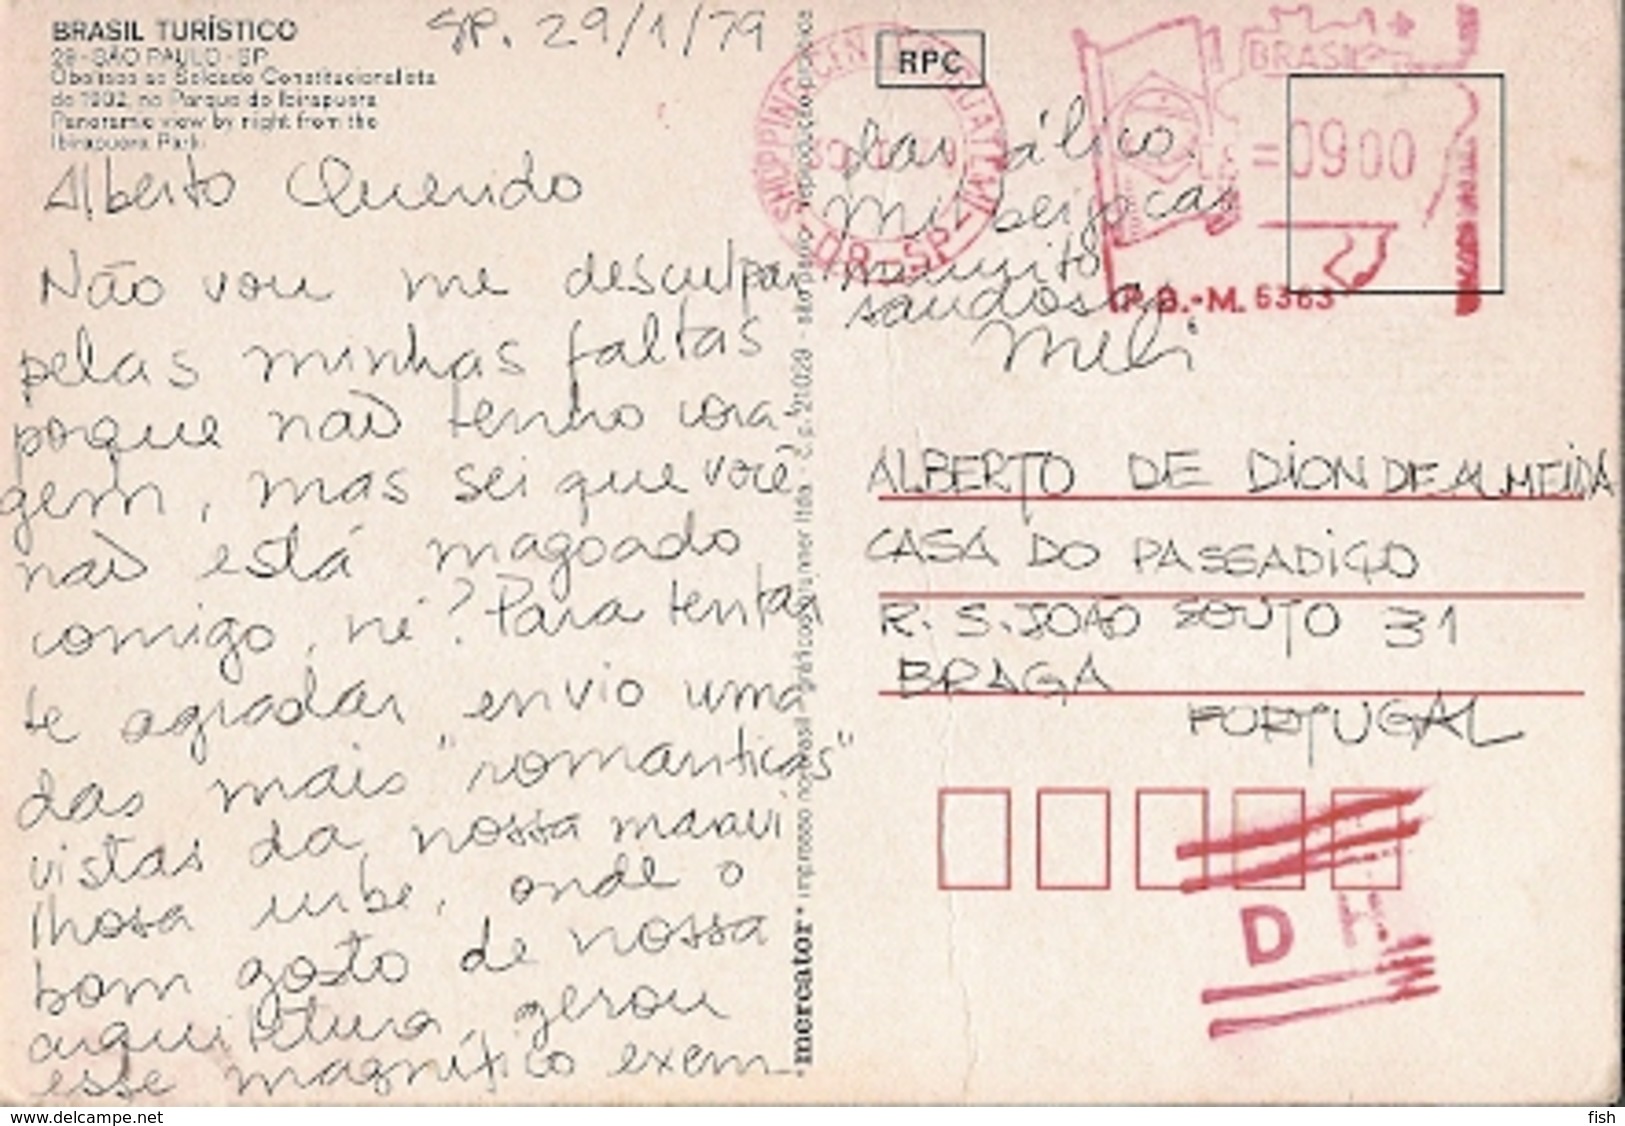 Brazil & Circulated, São Paulo, Obelisk To The Constitutionalist Soldier 1932, Braga 1979 (29) - Monuments